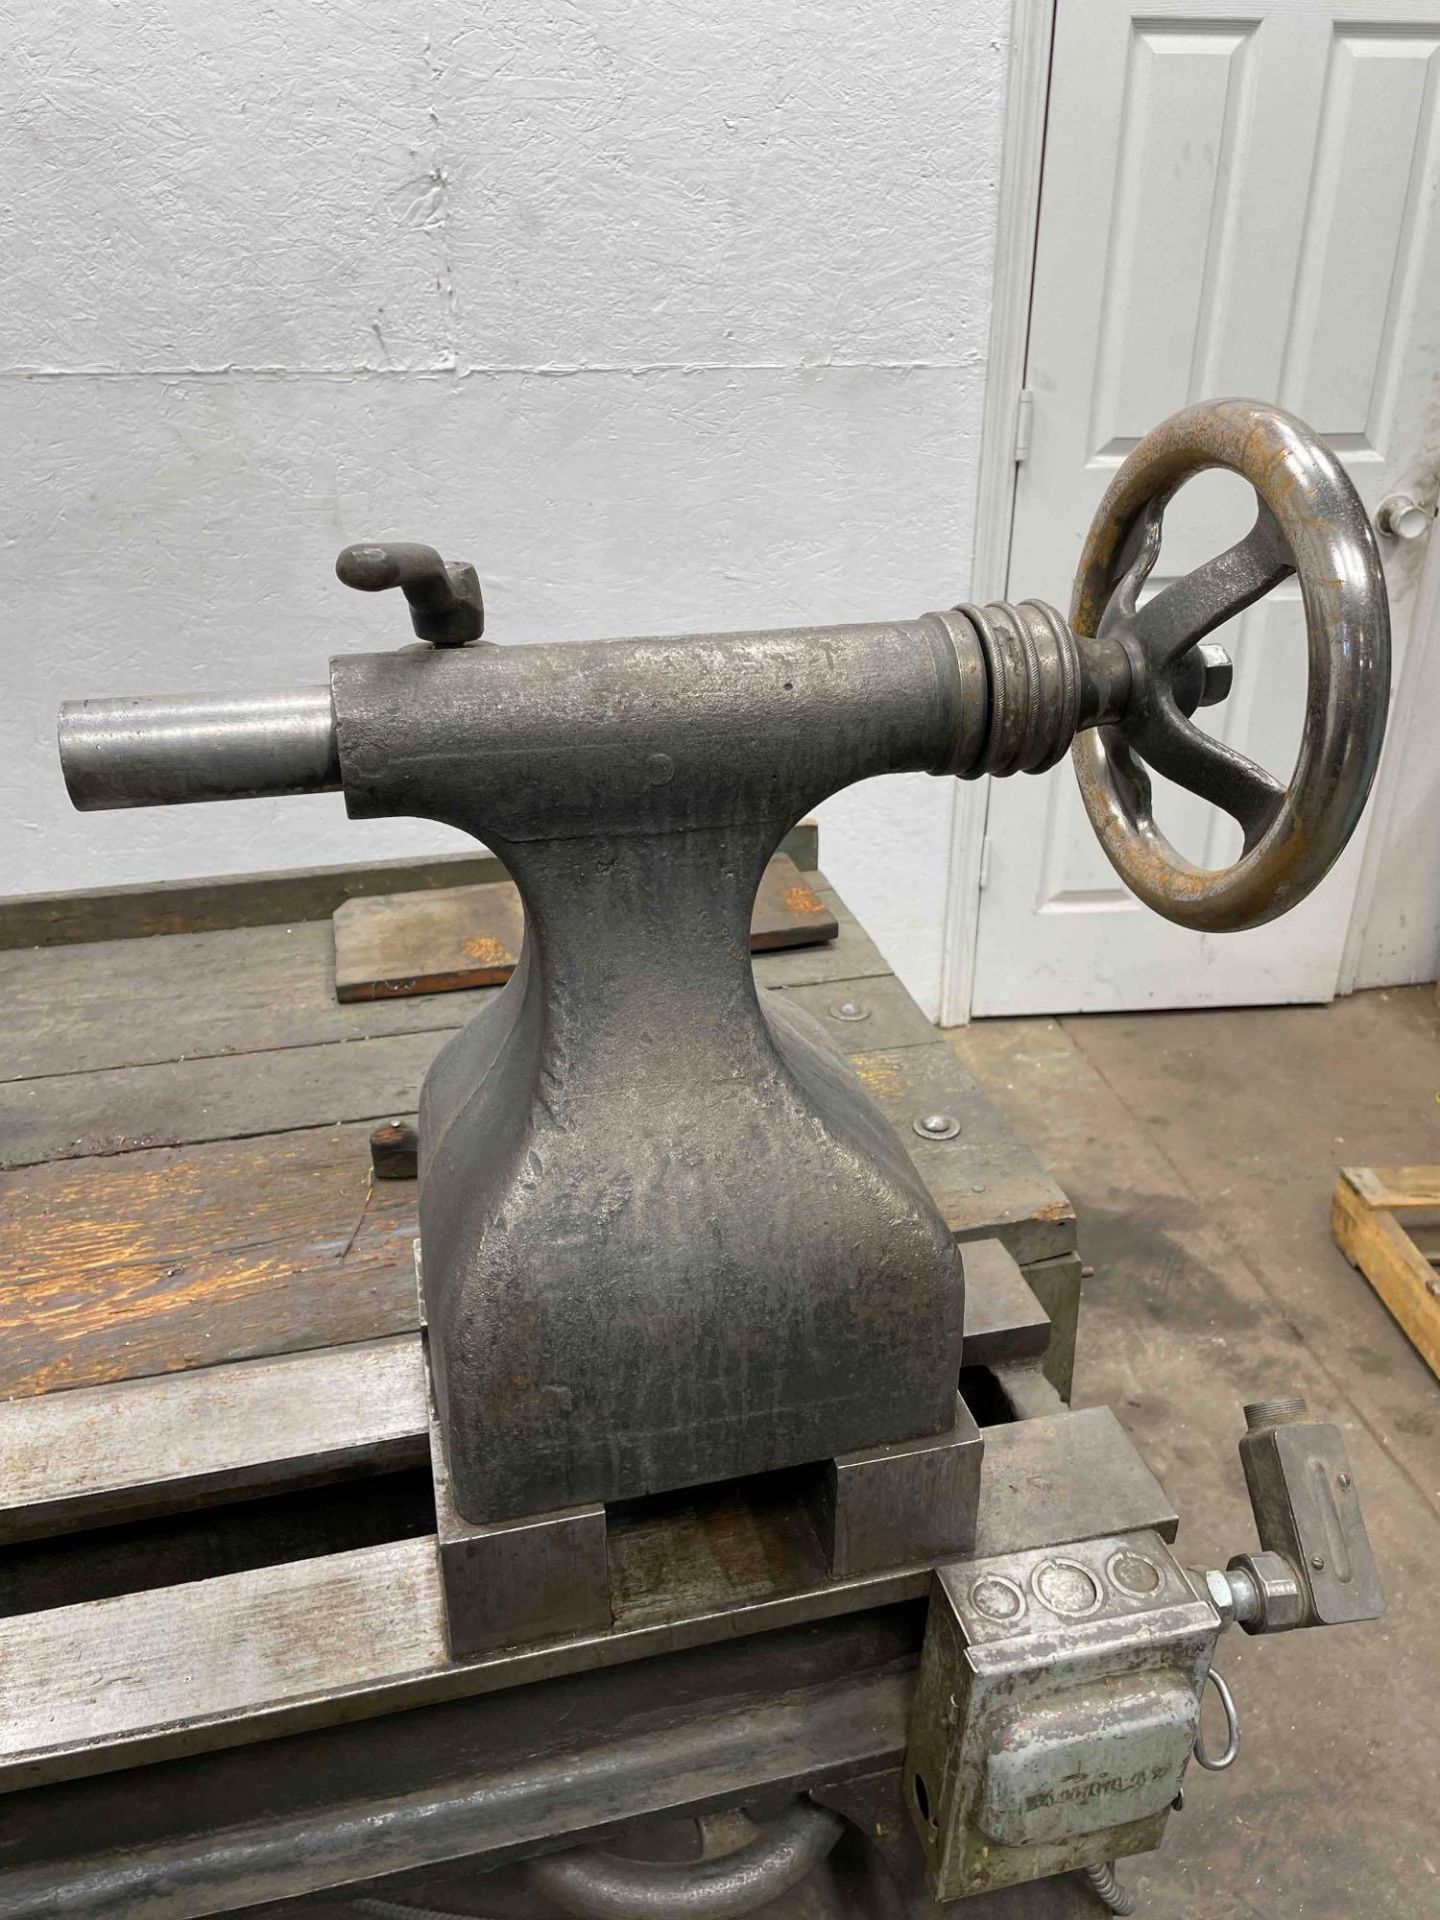 E.O.Grabo Machine Wks Spinning Lathe, 26 in Swing, 24" Between Centers, 1.5 HP, 1 Phase, 208V   $50 - Image 10 of 19